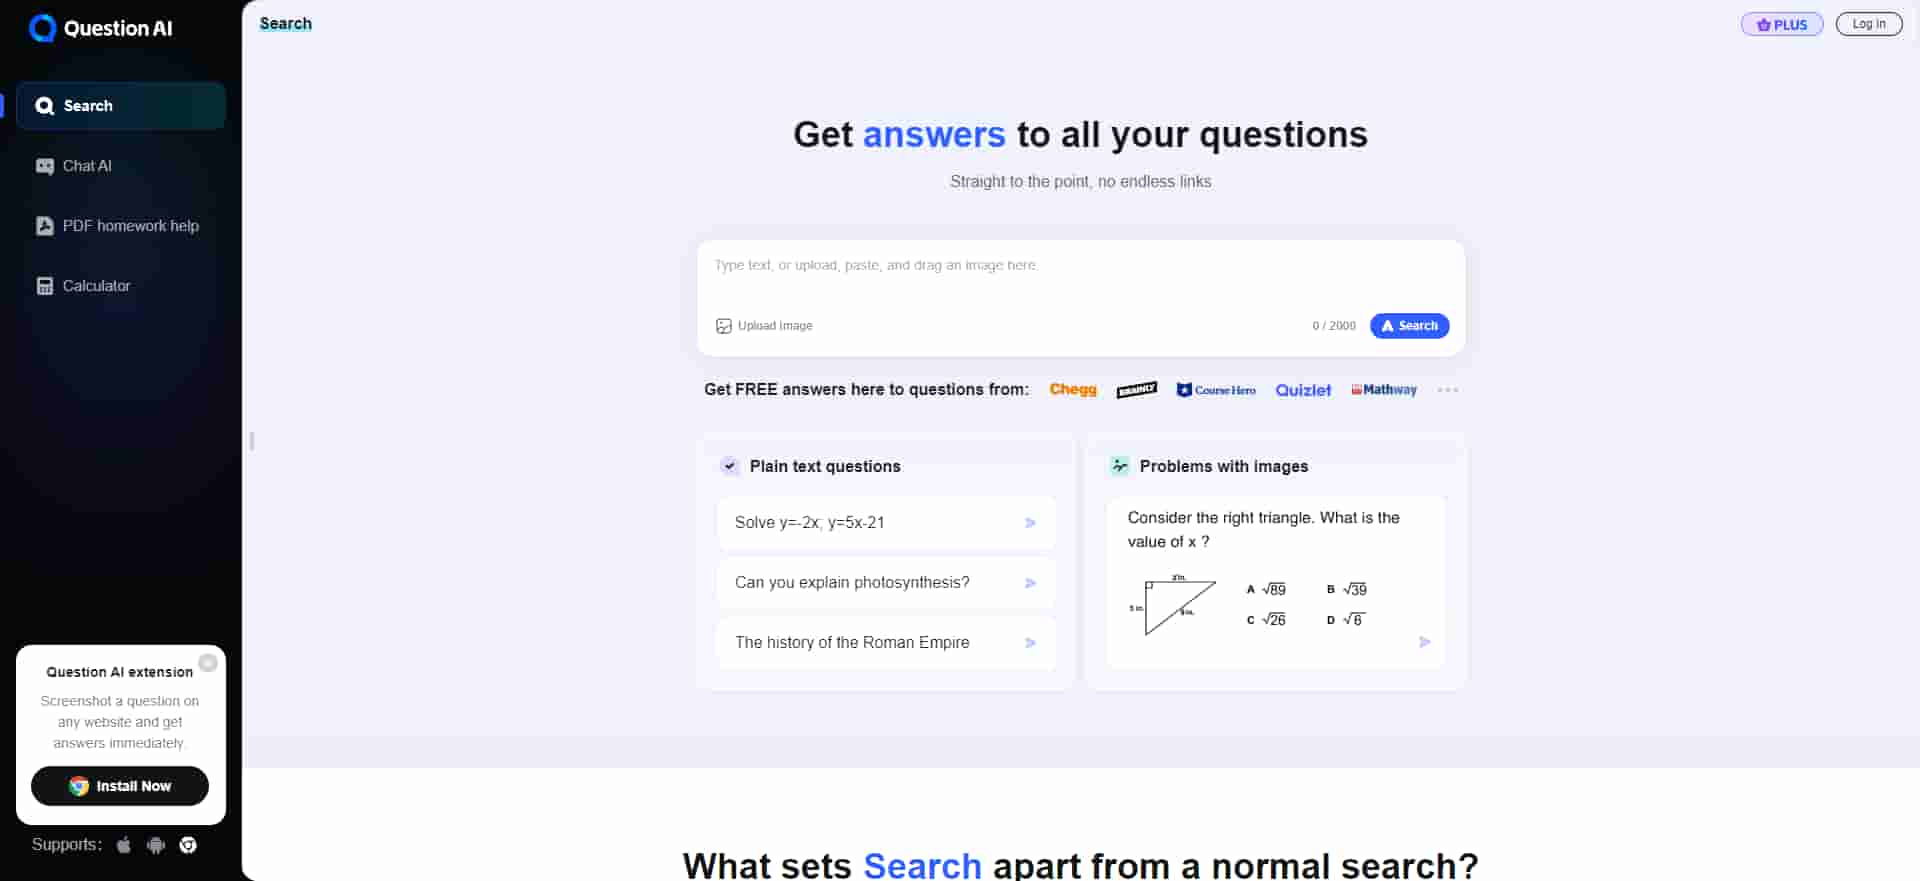 QuestionAI - Discover how QuestionAI leverages artificial intelligence to provide precise and comprehensive answers to your questions. Explore its features, usage instructions, FAQs, and pricing details.